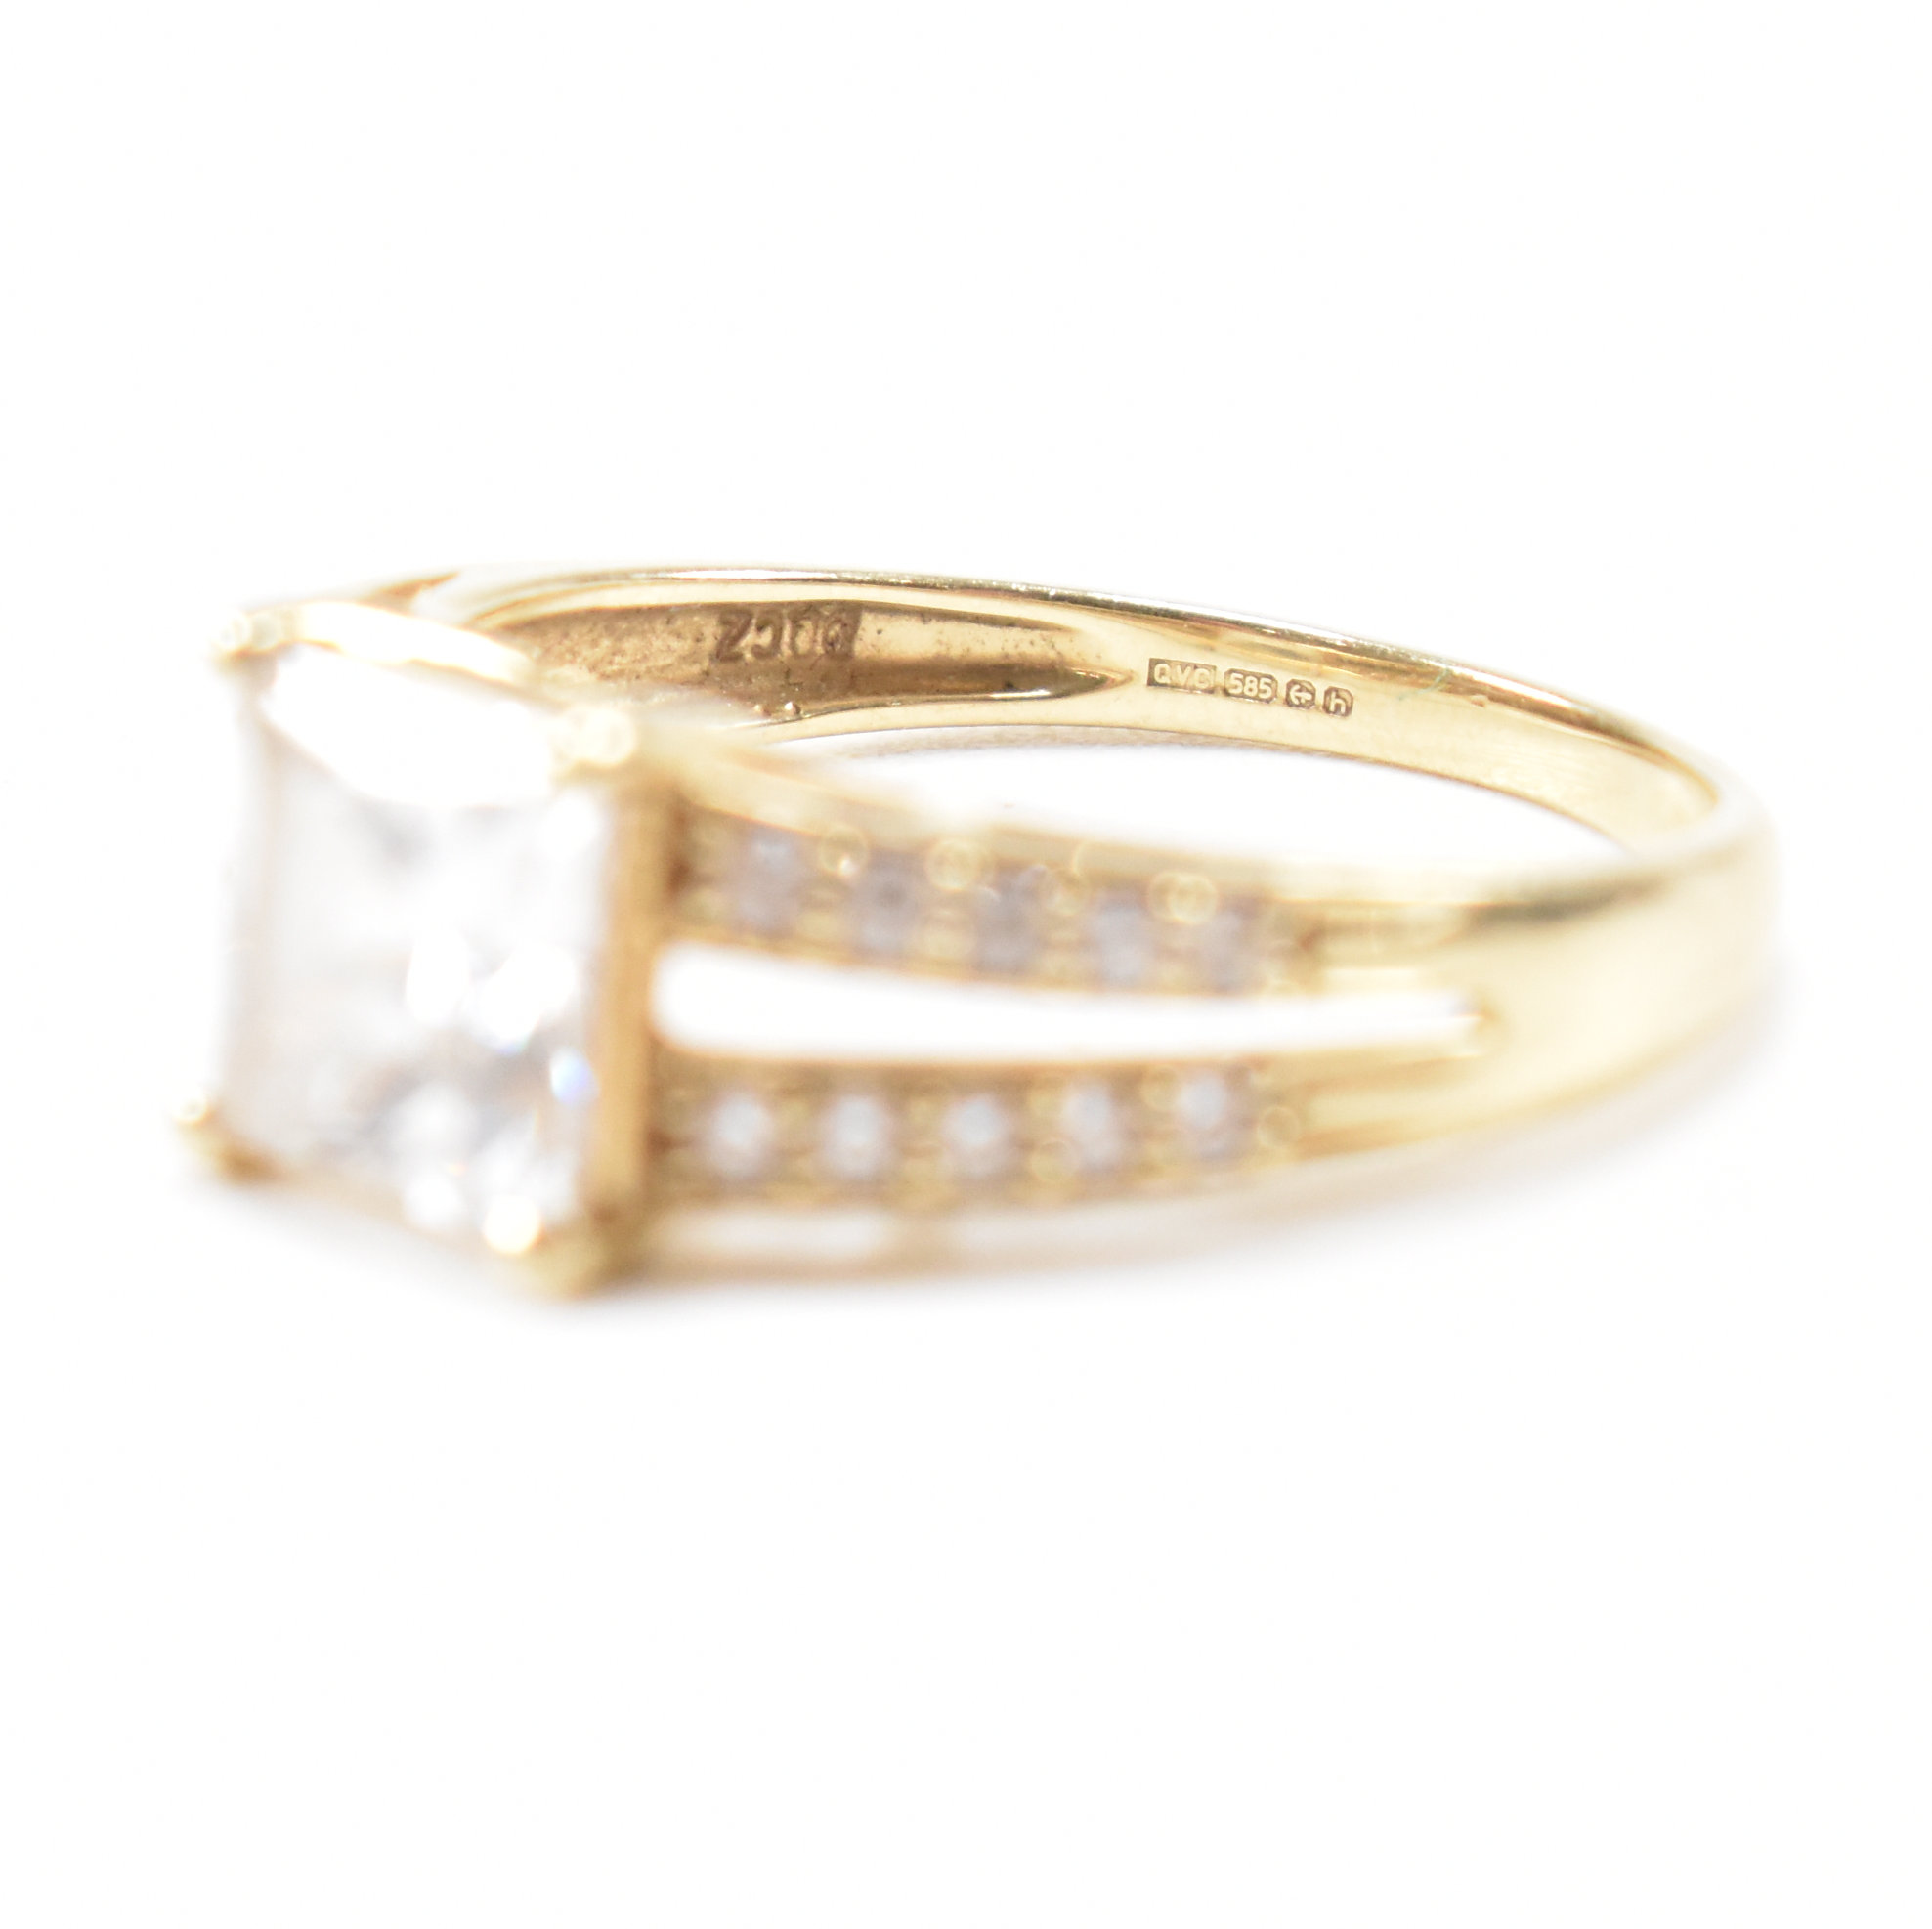 HALLMARKED 14CT GOLD & CUBIC ZIRCONIA RING - Image 8 of 9